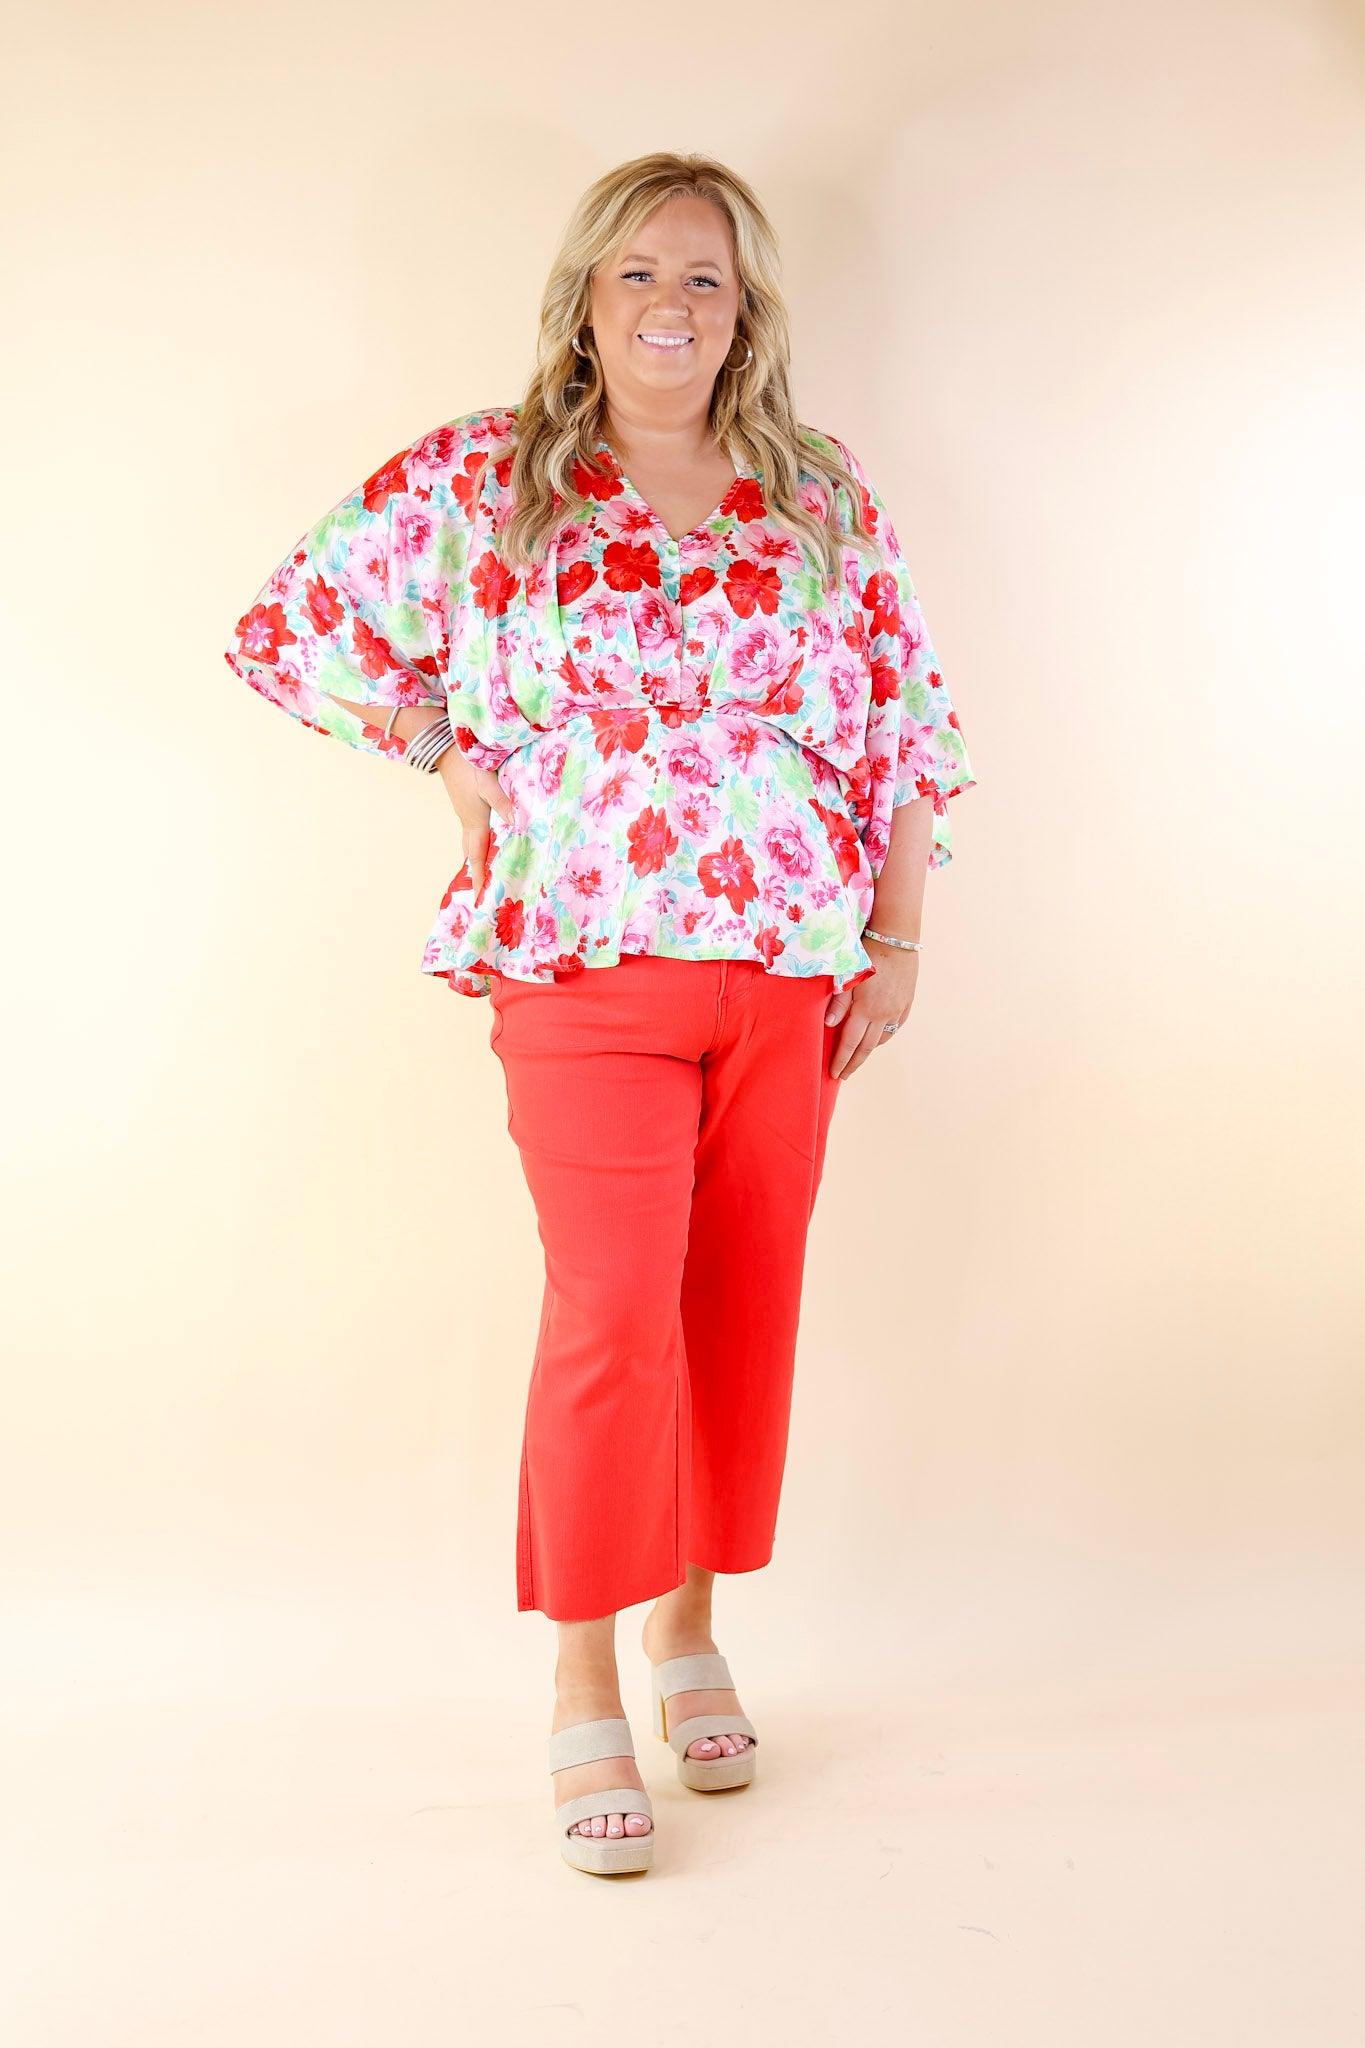 Hear the Music Drop Sleeve Satin Floral Print V Neck Peplum Top in White - Giddy Up Glamour Boutique